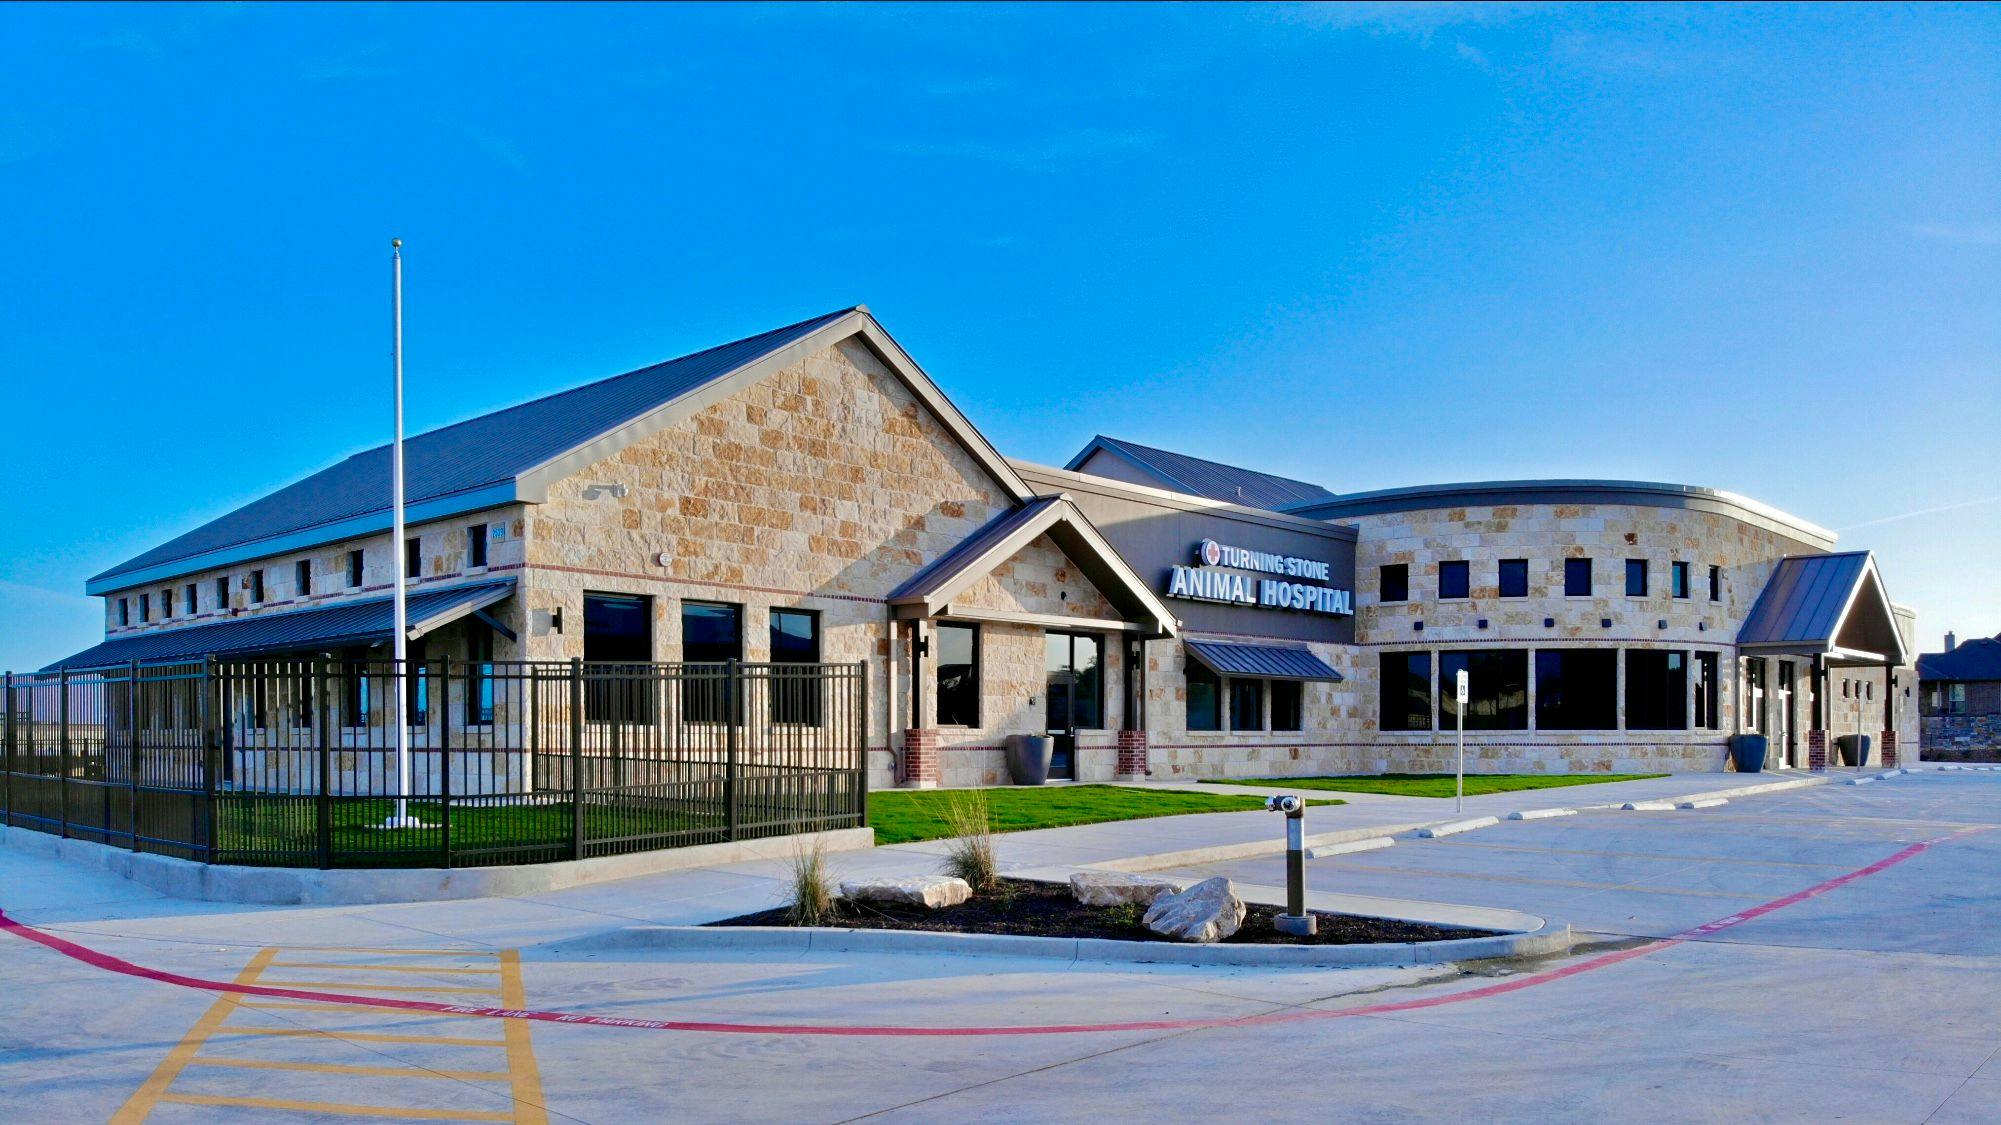 Set on 1.67 acres, this Texas hospital makes an impression with a radial
design near the entryway, stonework, and lots of windows to allow in natural light. 